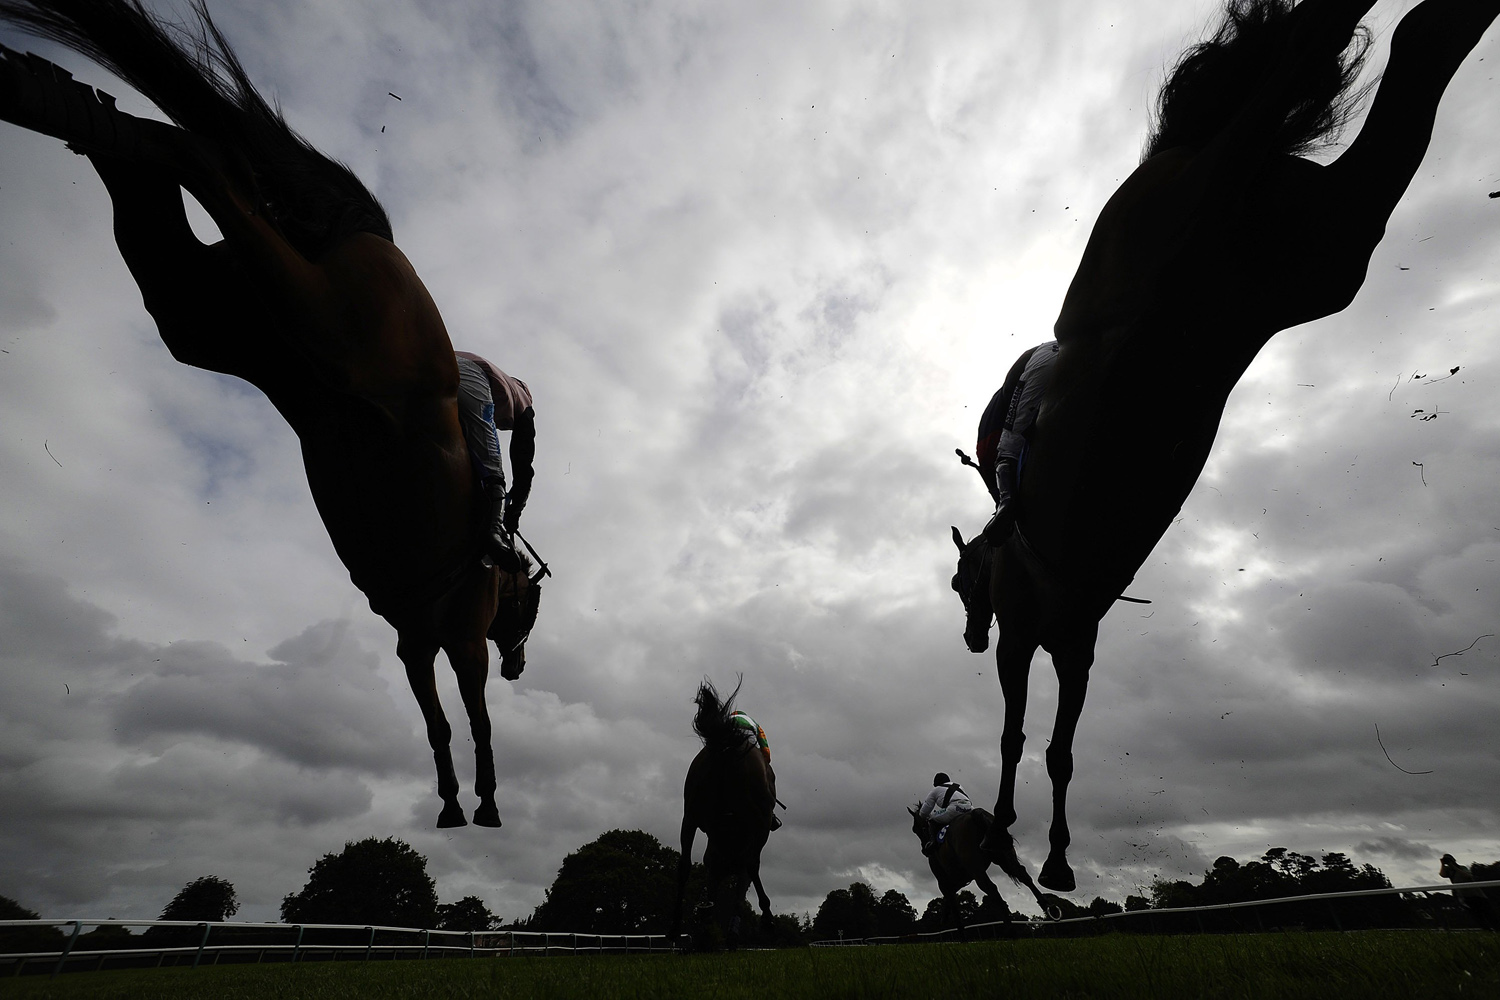 Aug. 28, 2014. Runners clear a fence in The £500 Permanent Money Backs Handicap Steeple Chase at Fontwell racecourse in Fontwell, England.